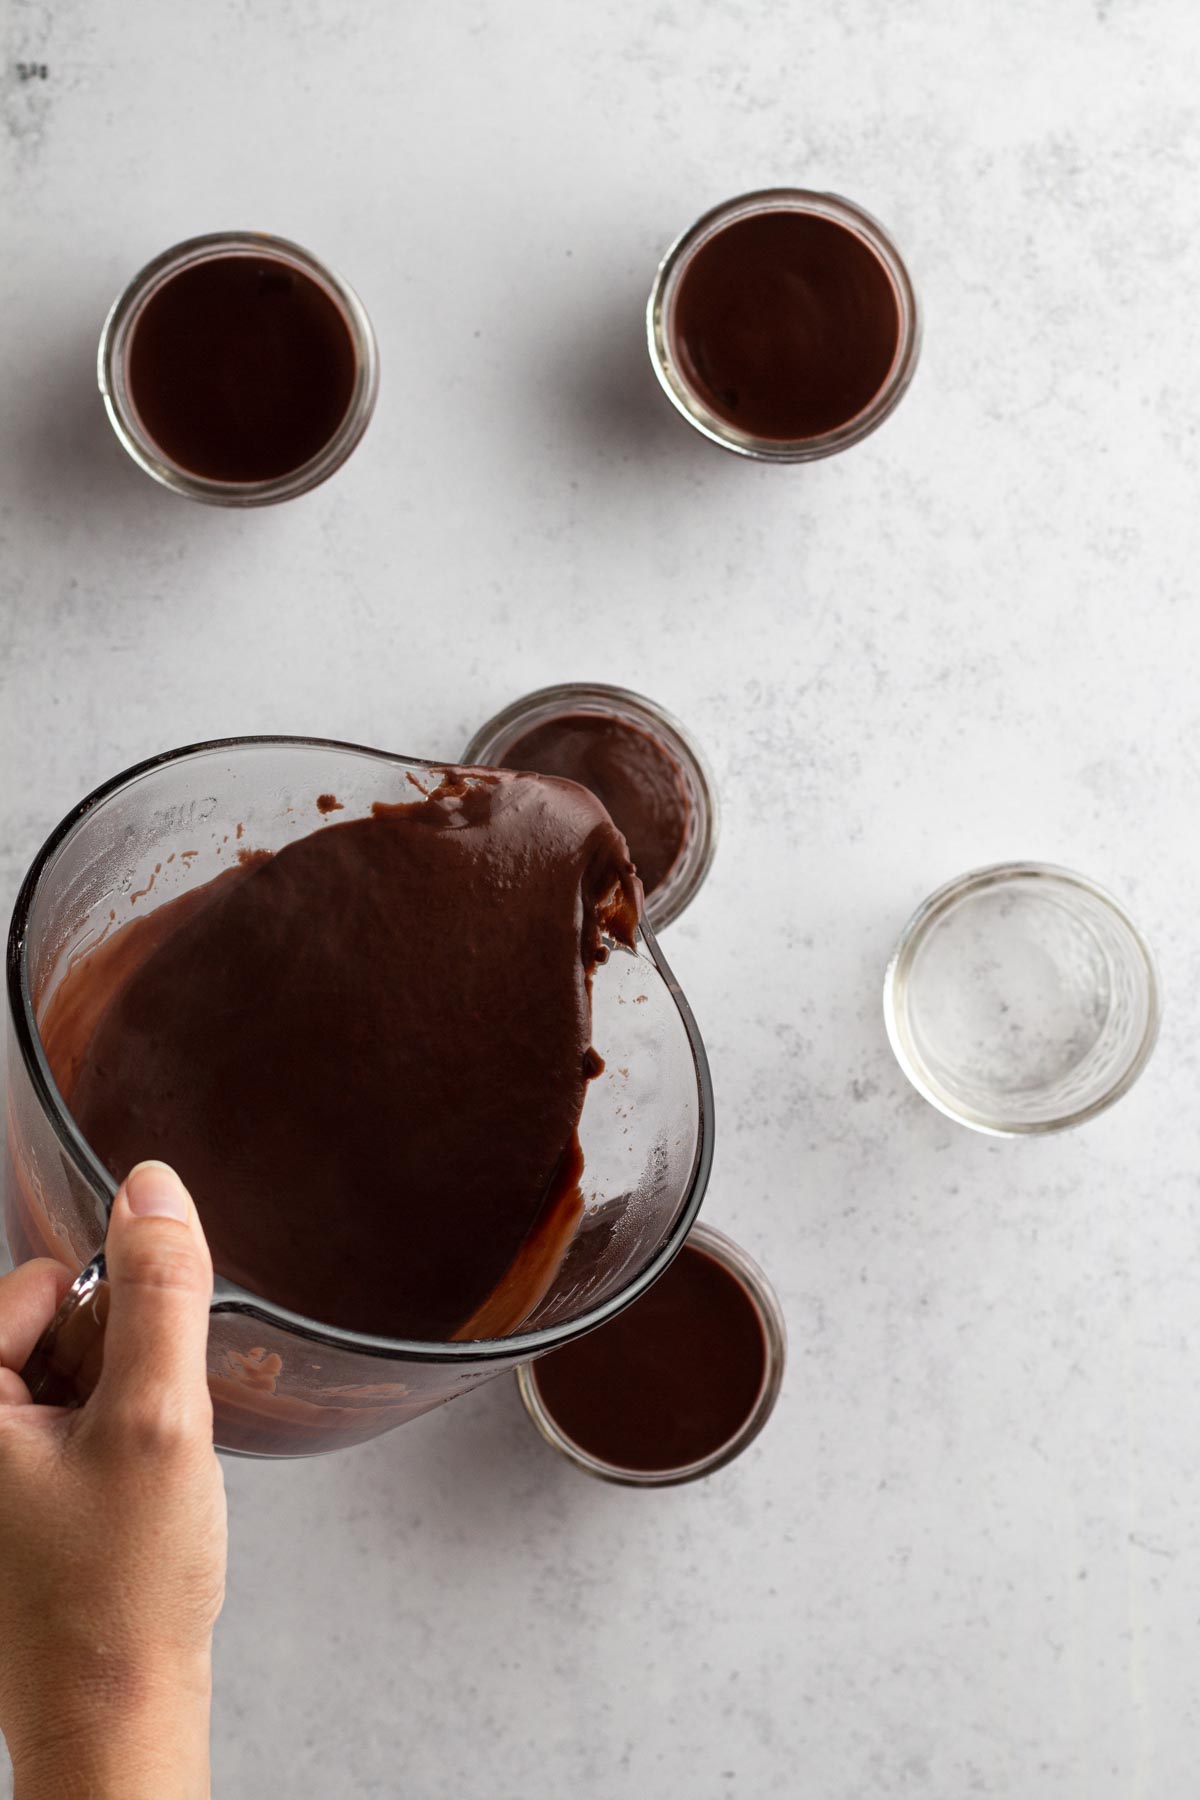 Pouring pudding into jars.